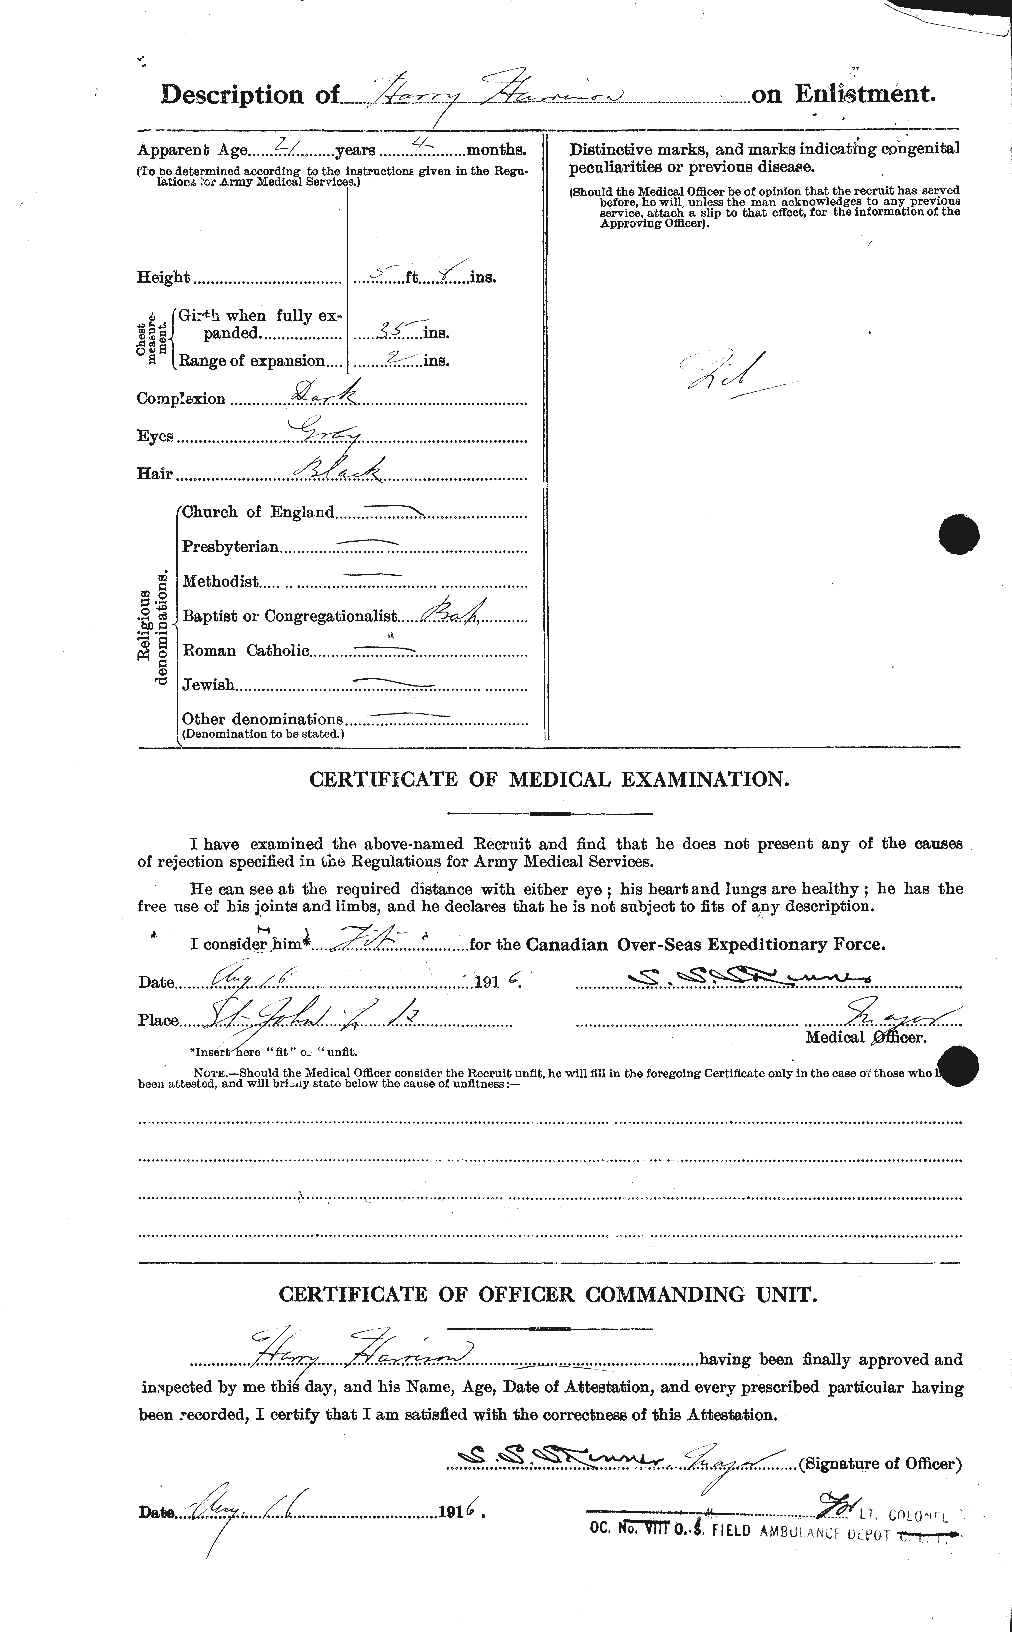 Personnel Records of the First World War - CEF 380496b